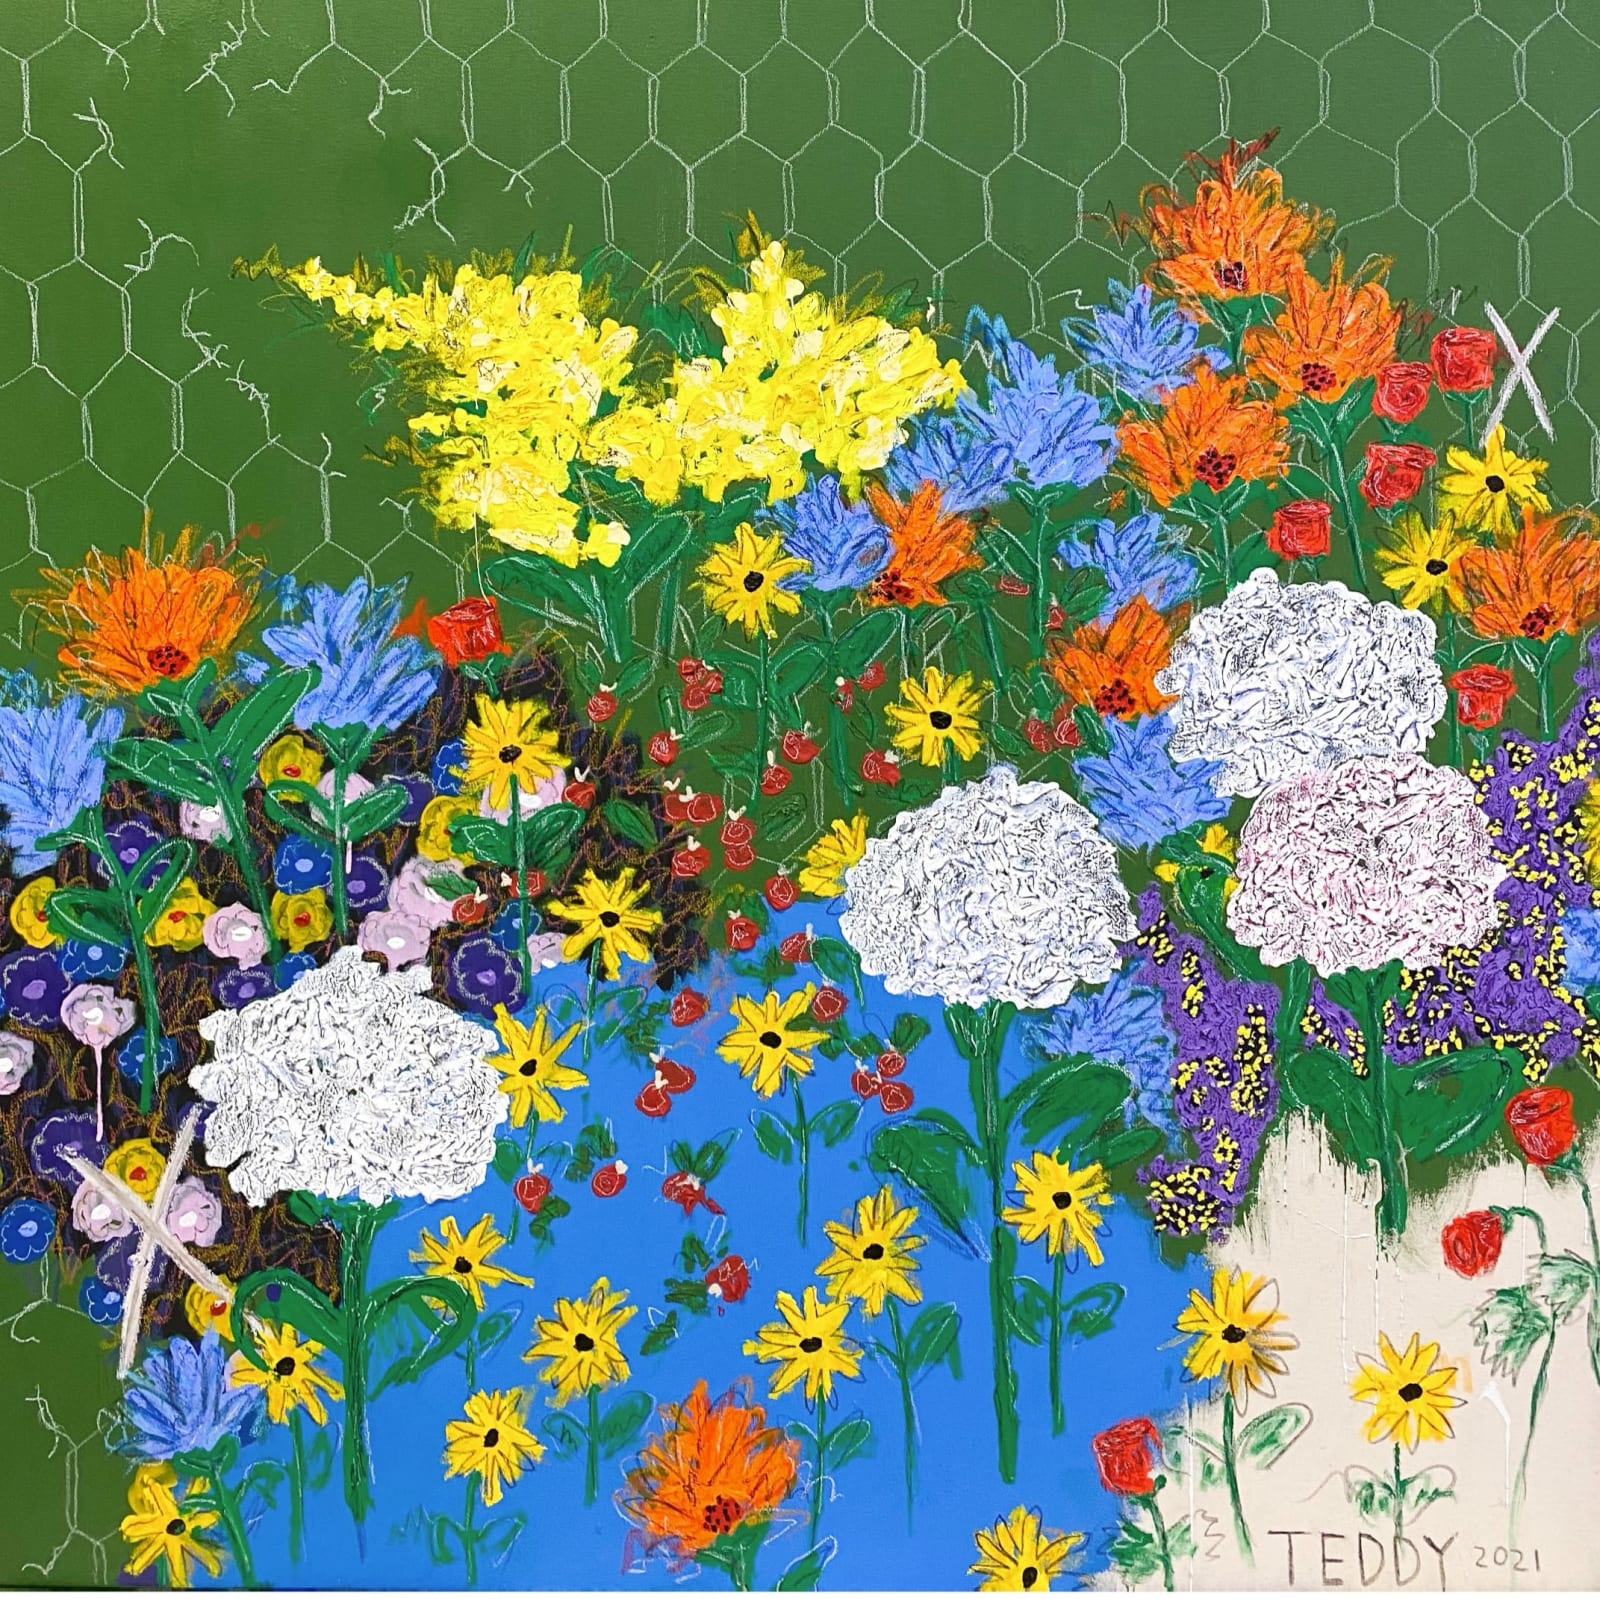 Teddy Benfield, Untitled (Pile of Flowers / Fence 2), 2021